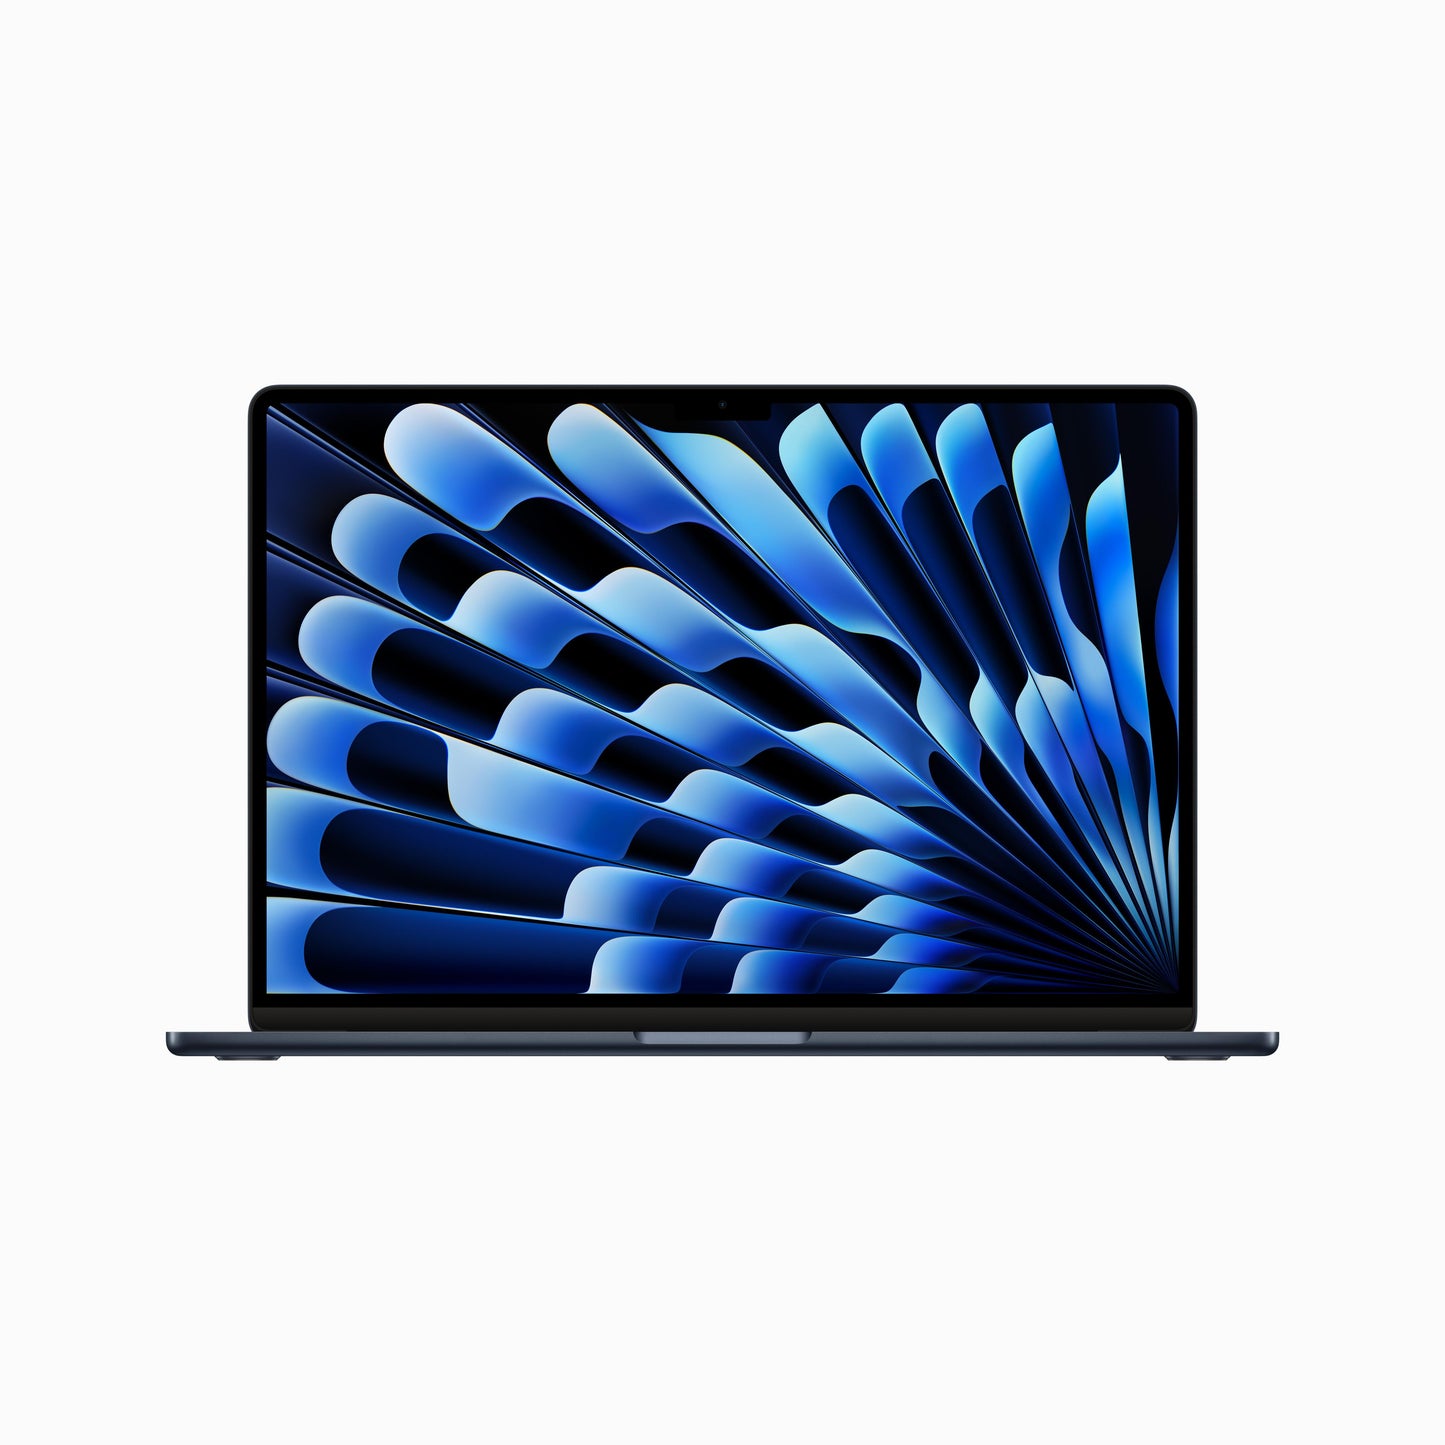 15-inch MacBook Air: Apple M2 chip with 8-core CPU and 10-core GPU, 256GB SSD - Midnight